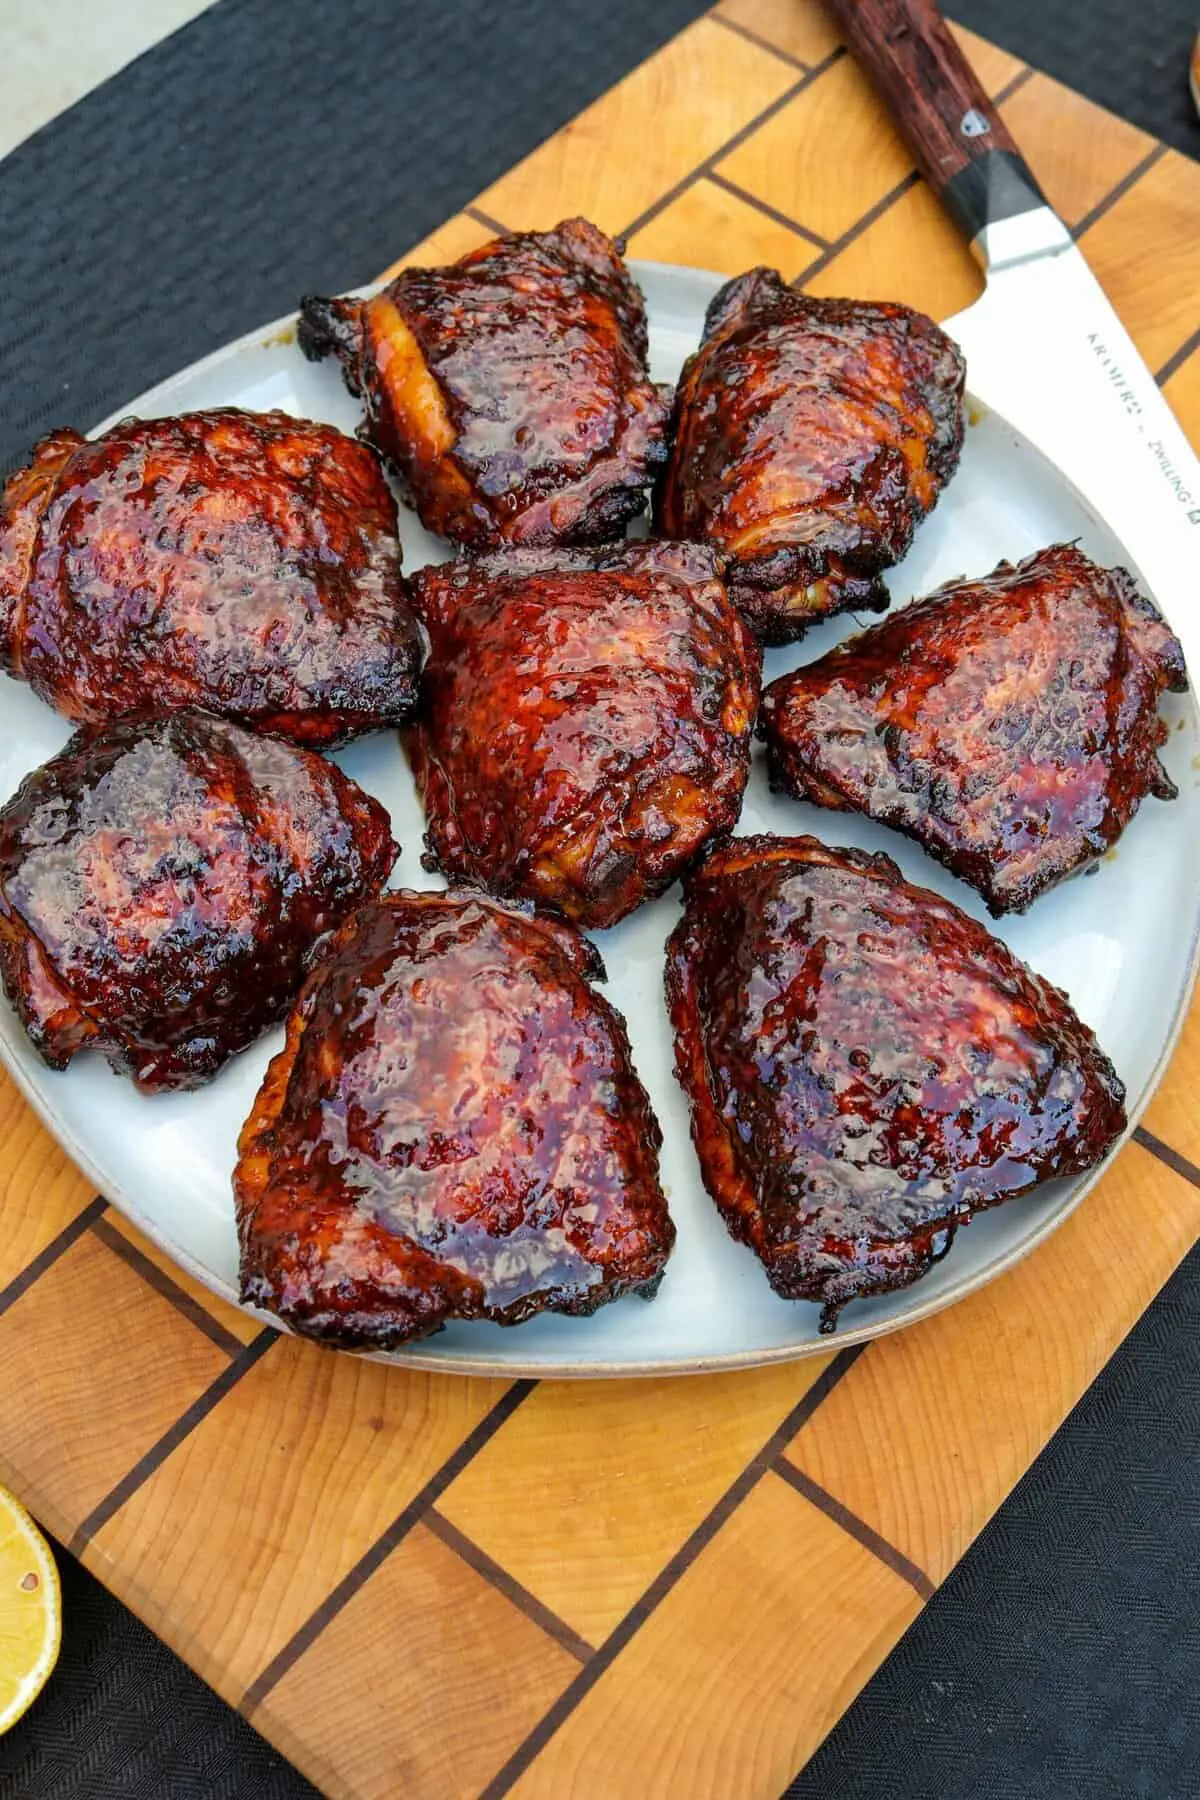 smoked chicken recipe - What is the best flavor for smoking chicken